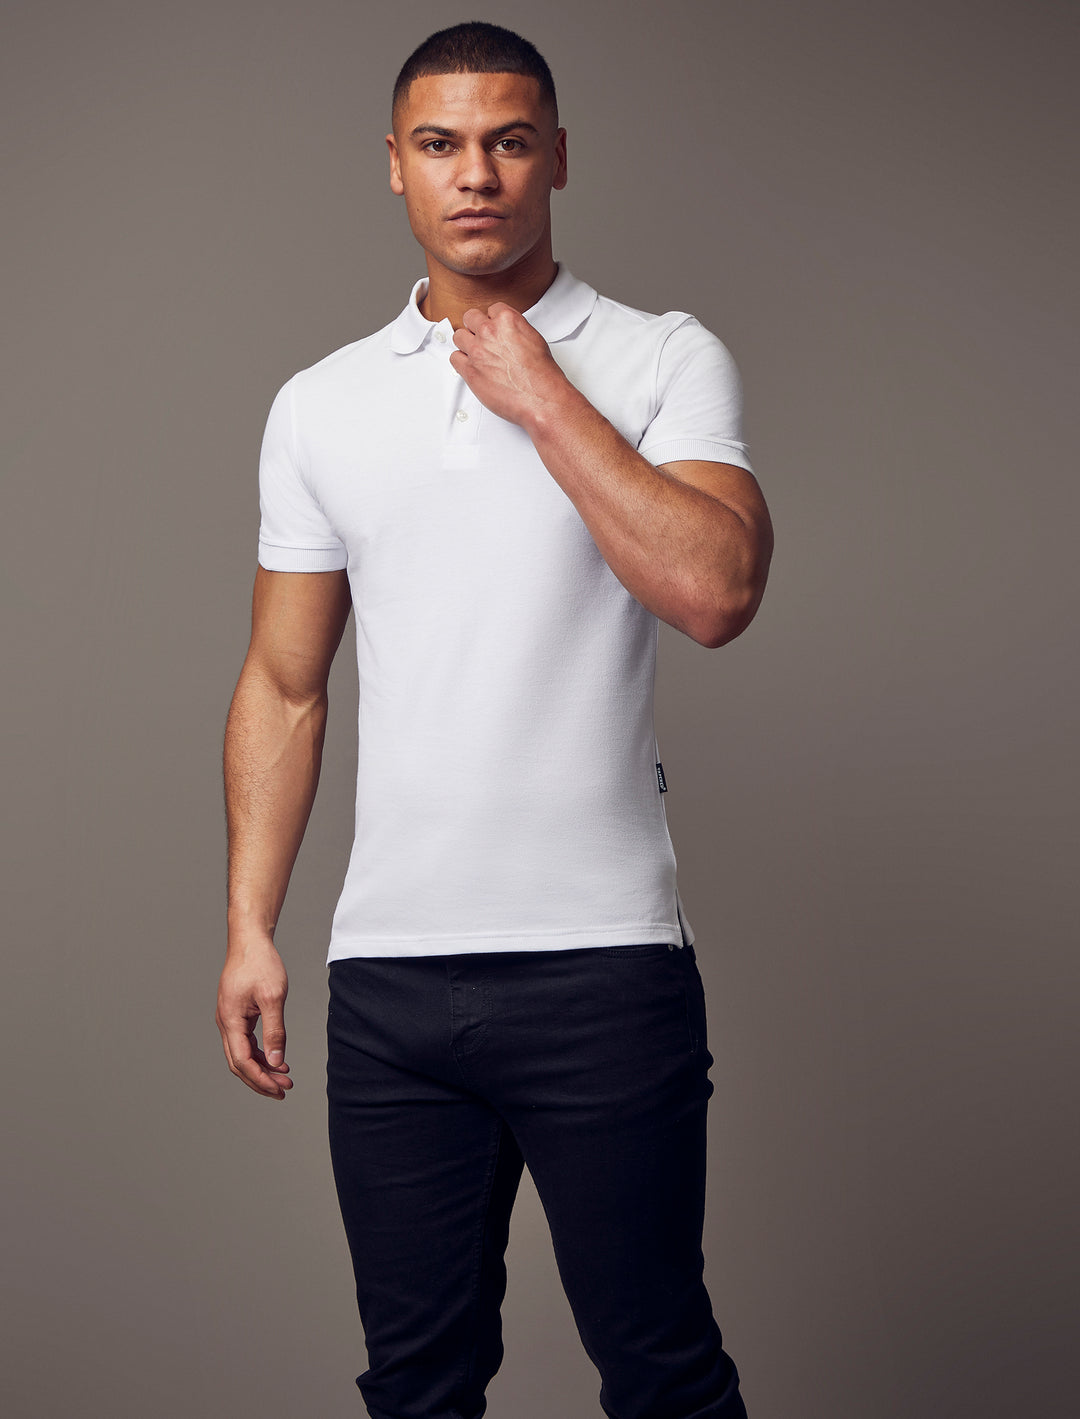  A short-sleeve, white polo shirt with a tapered fit by Tapered Menswear, highlighting the muscle fit design for a comfortable yet stylish silhouette.